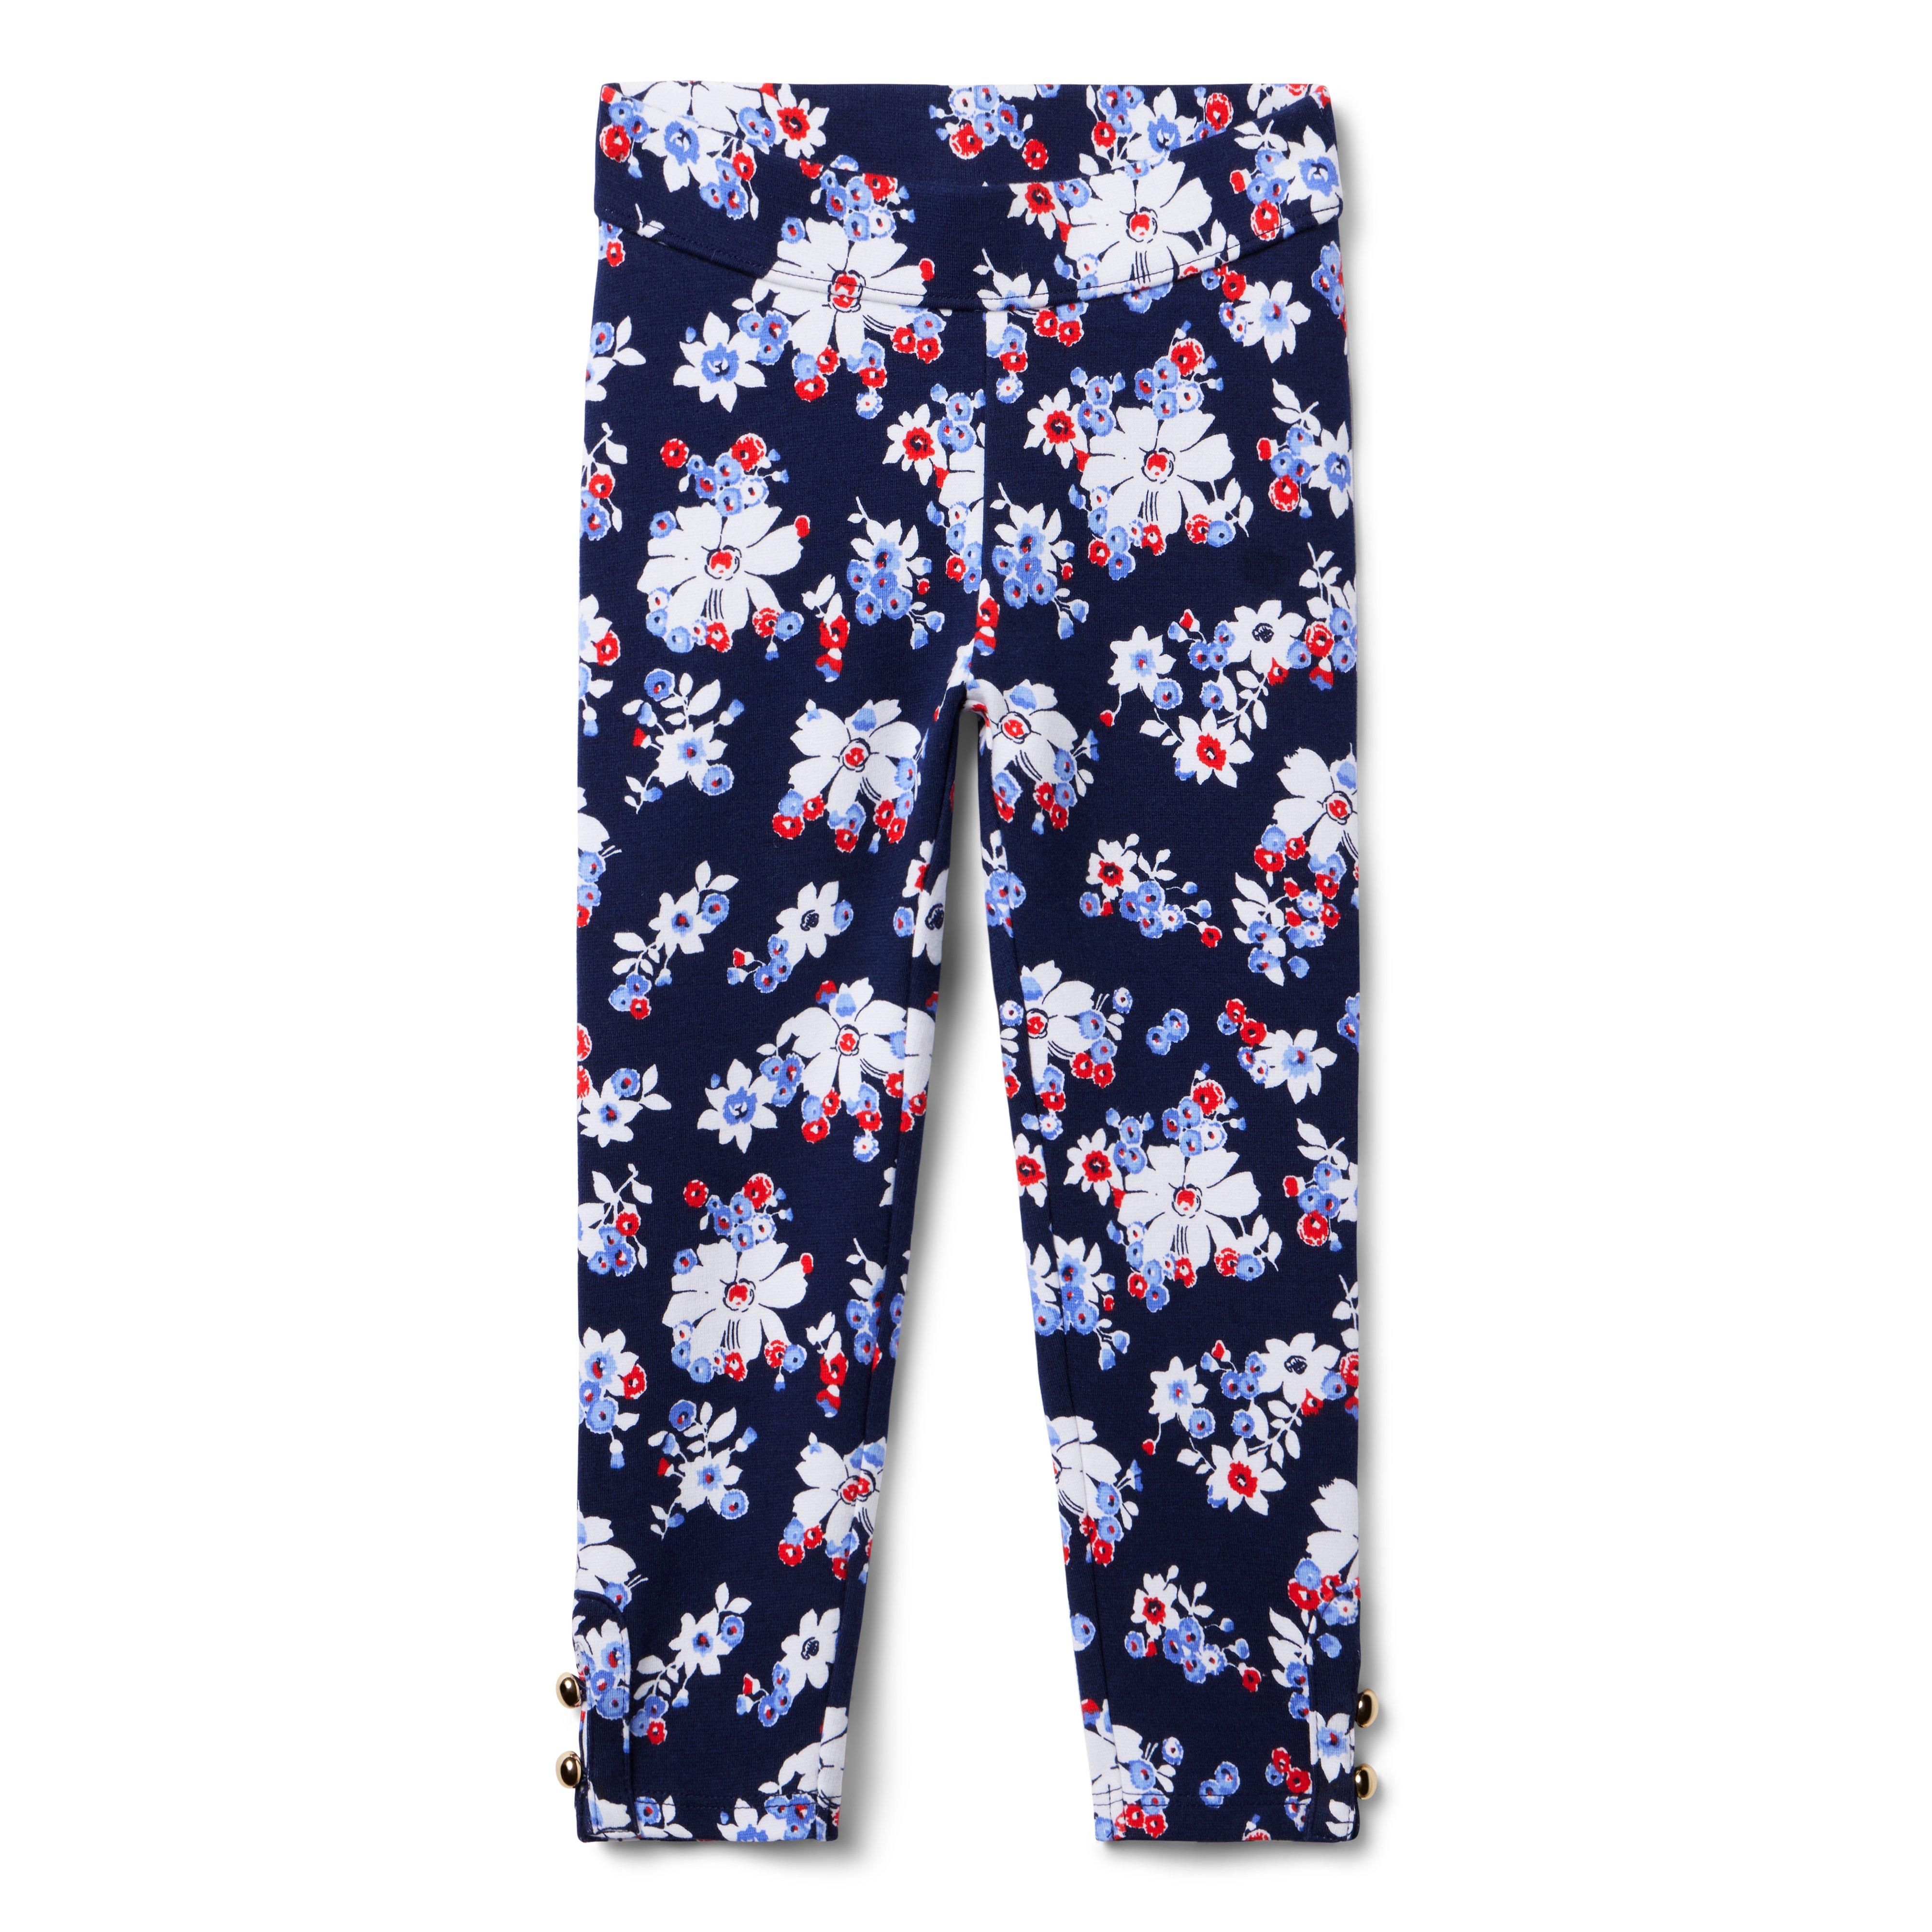 Girl Merchant Marine Floral Floral Button Cuff Ponte Pant by Janie and Jack